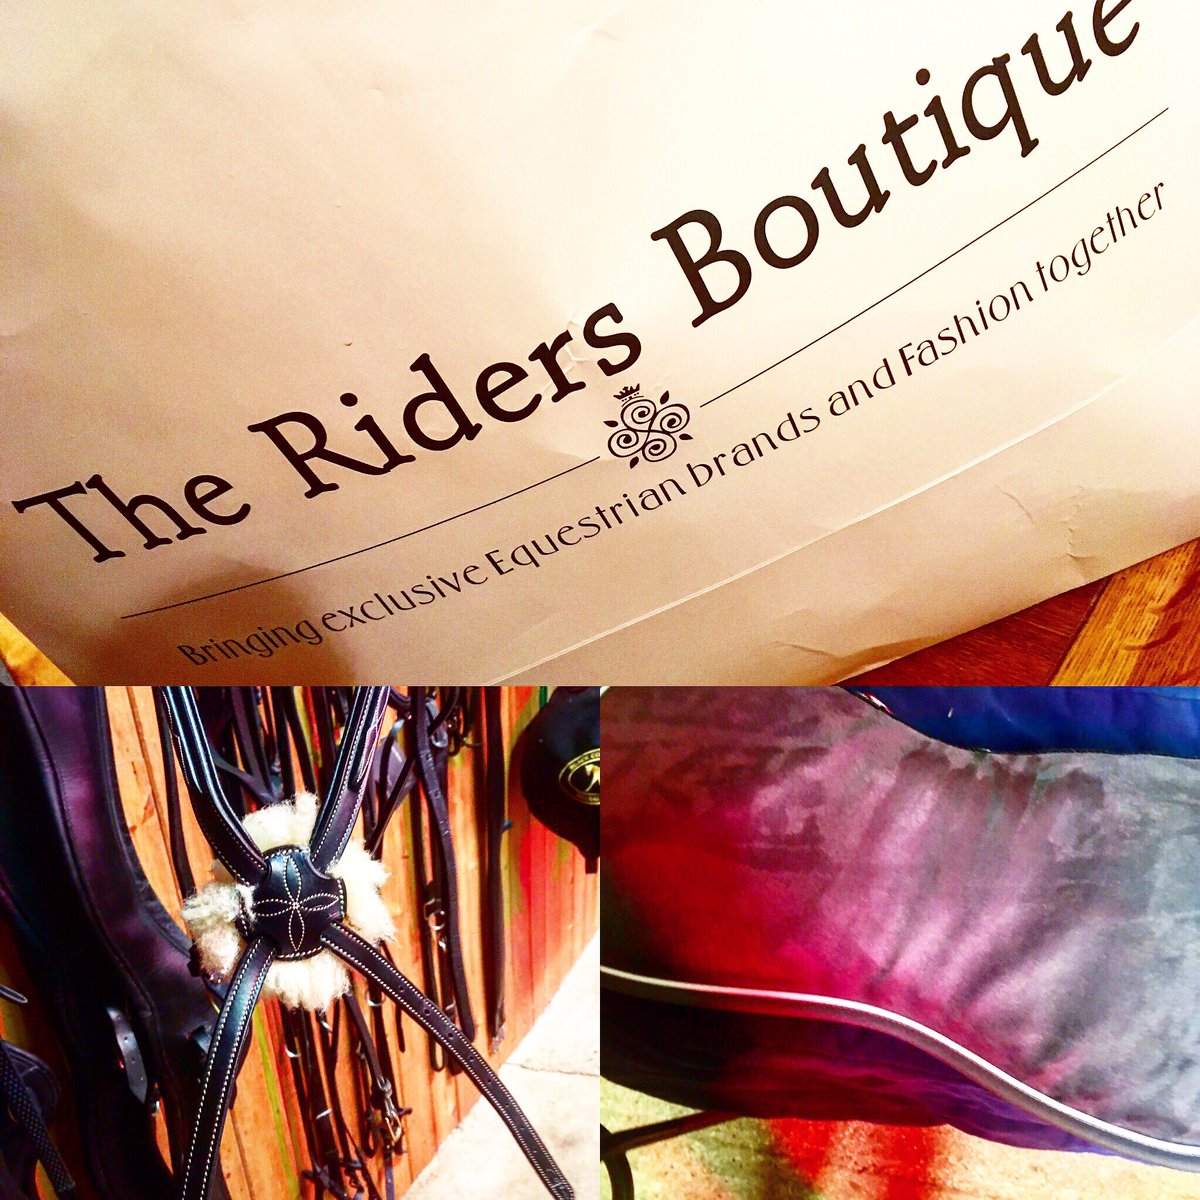 Cheeky little order of some lovely goodies from the riders boutique. #spoiltponies #snazzy #puttenhamplace #showjumpers